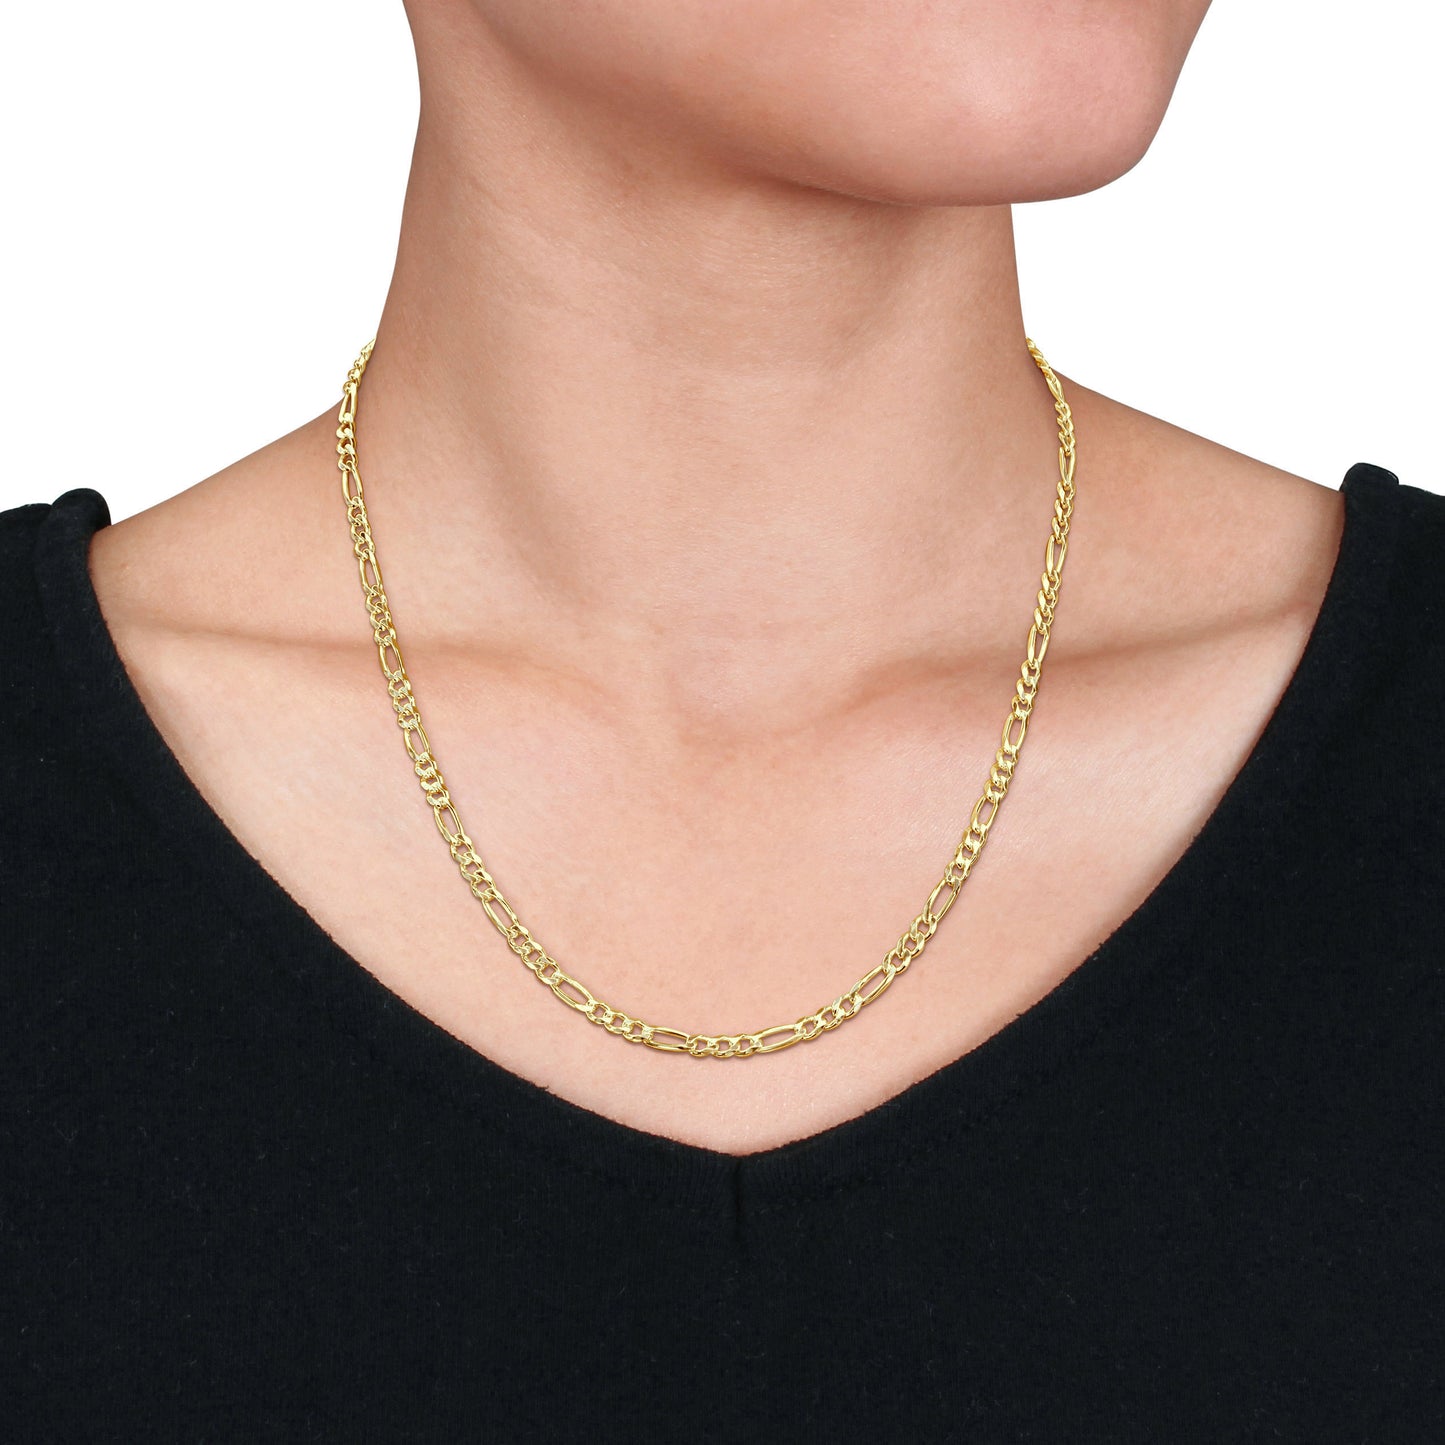 18k Yellow Gold Plated Figaro Chain in 3.6mm